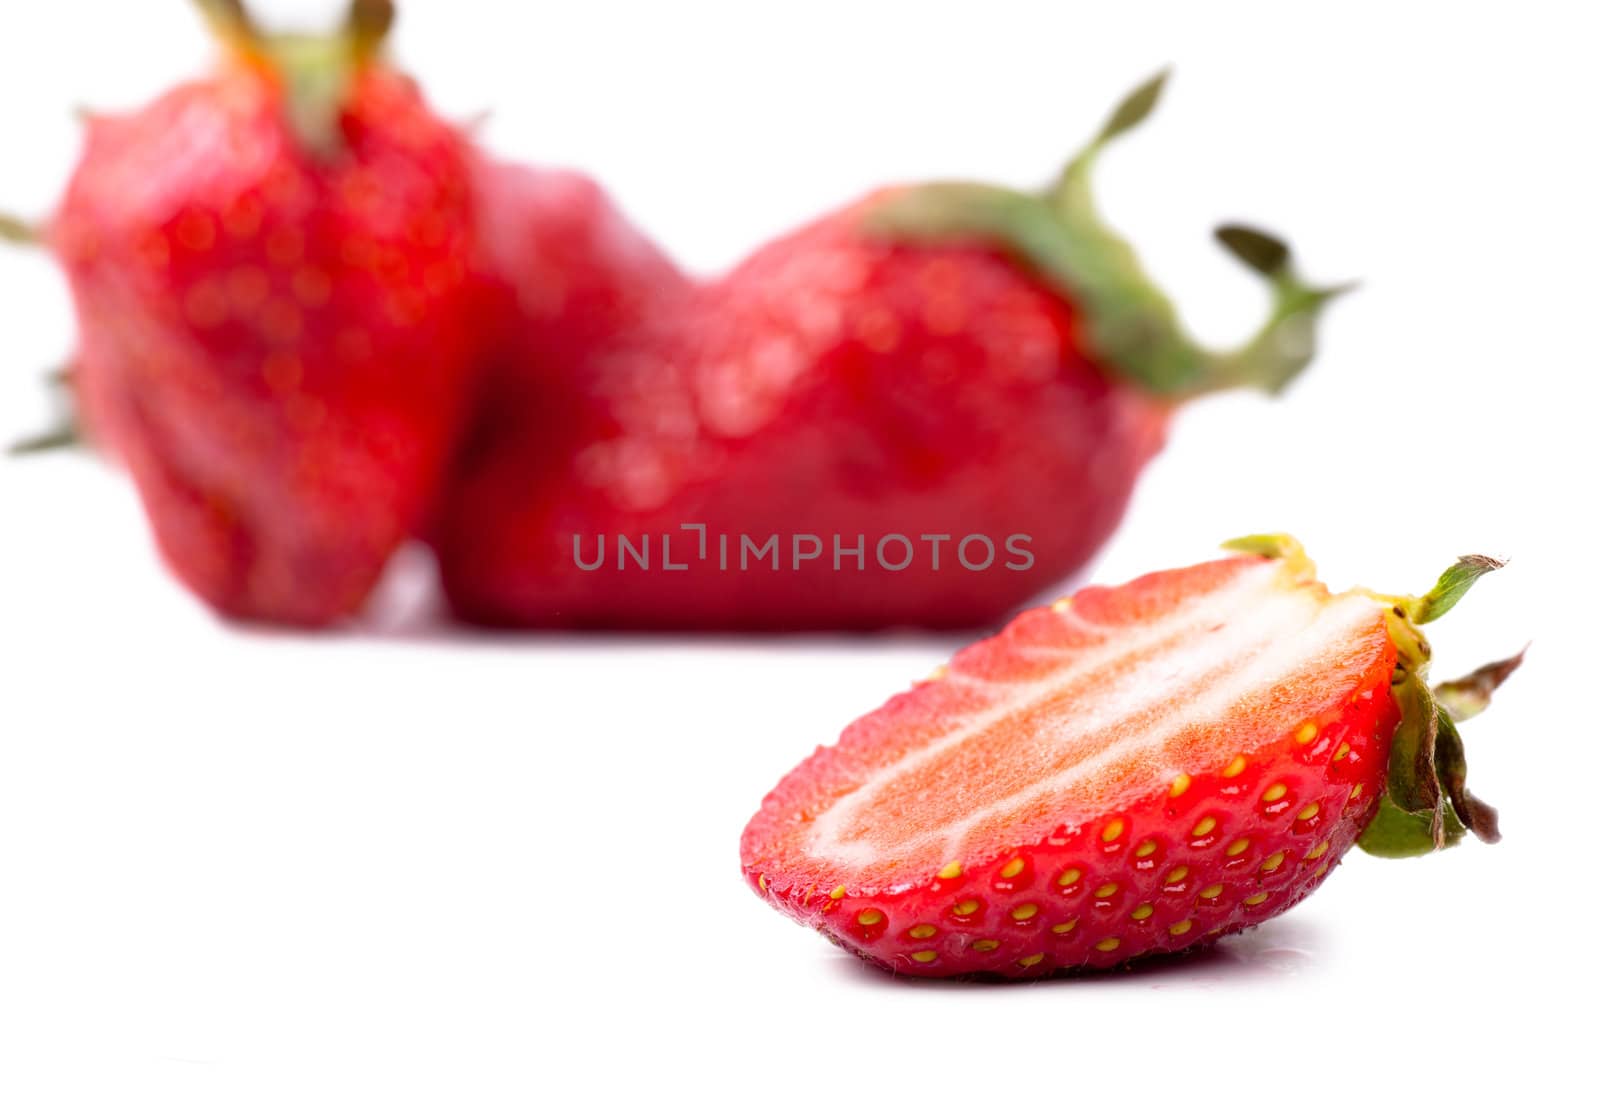 Strawberries by AGorohov